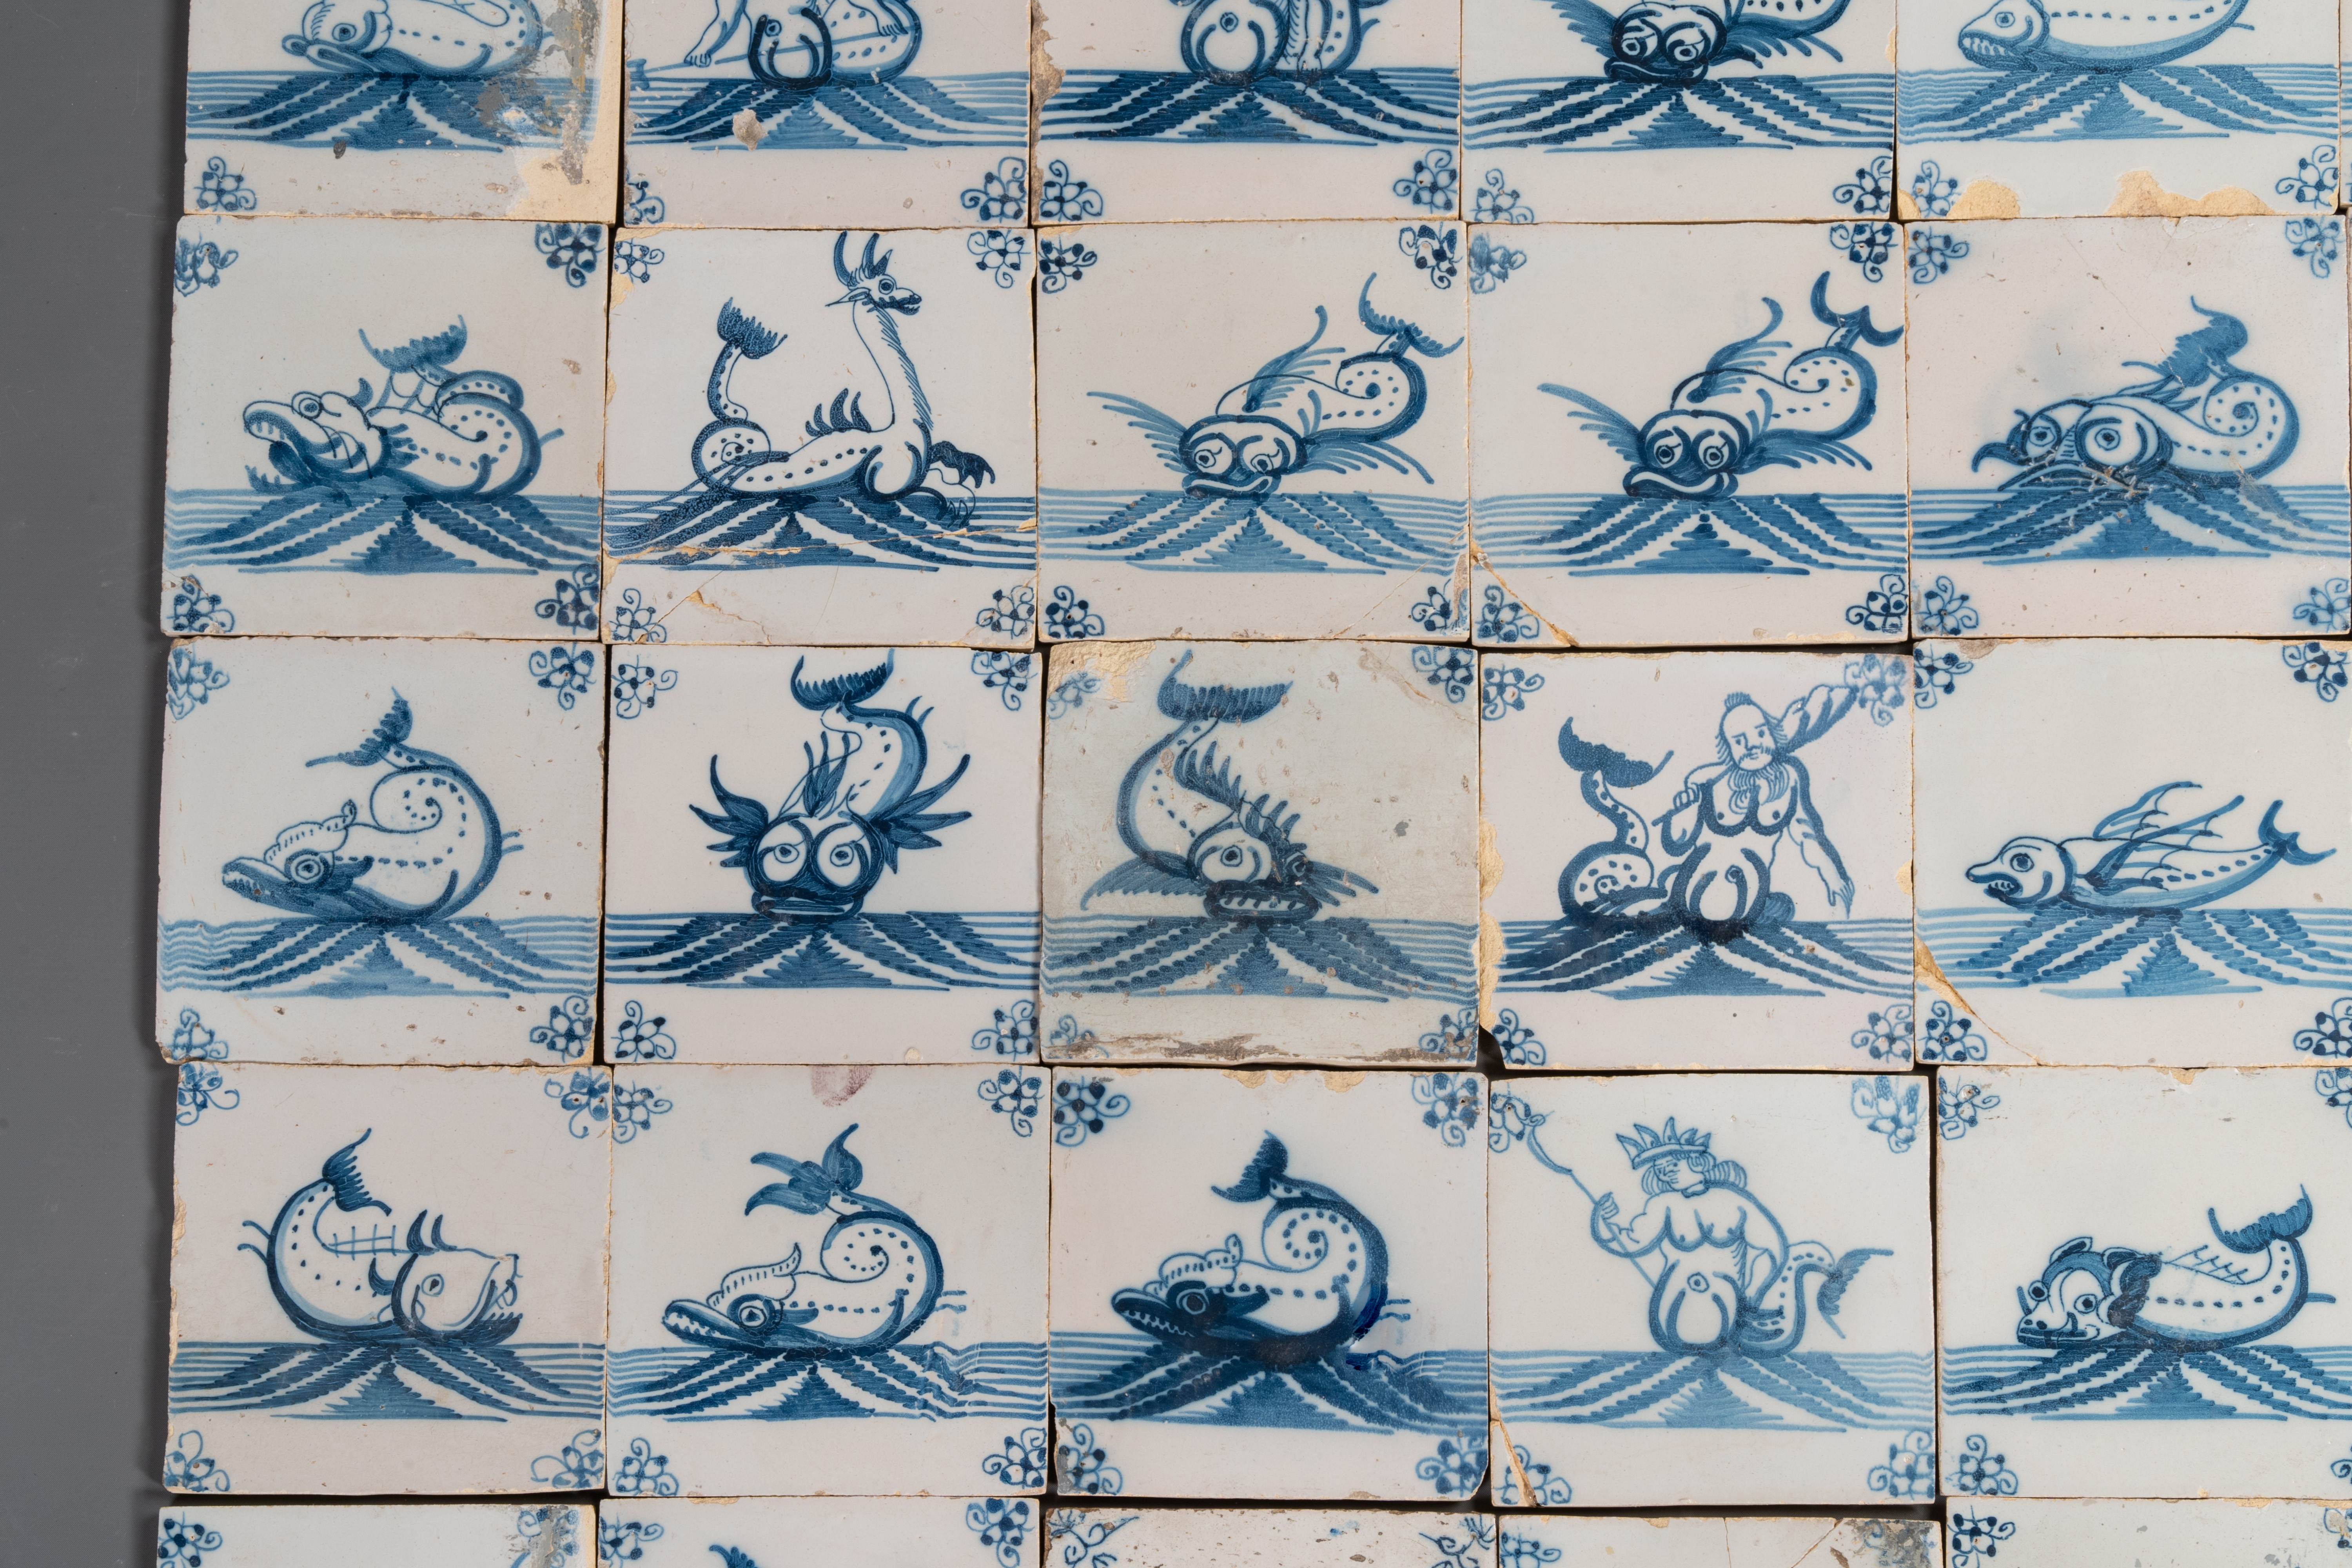 92 blue and white Dutch Delft tiles with sea monsters and ships, 18th C. - Image 3 of 16